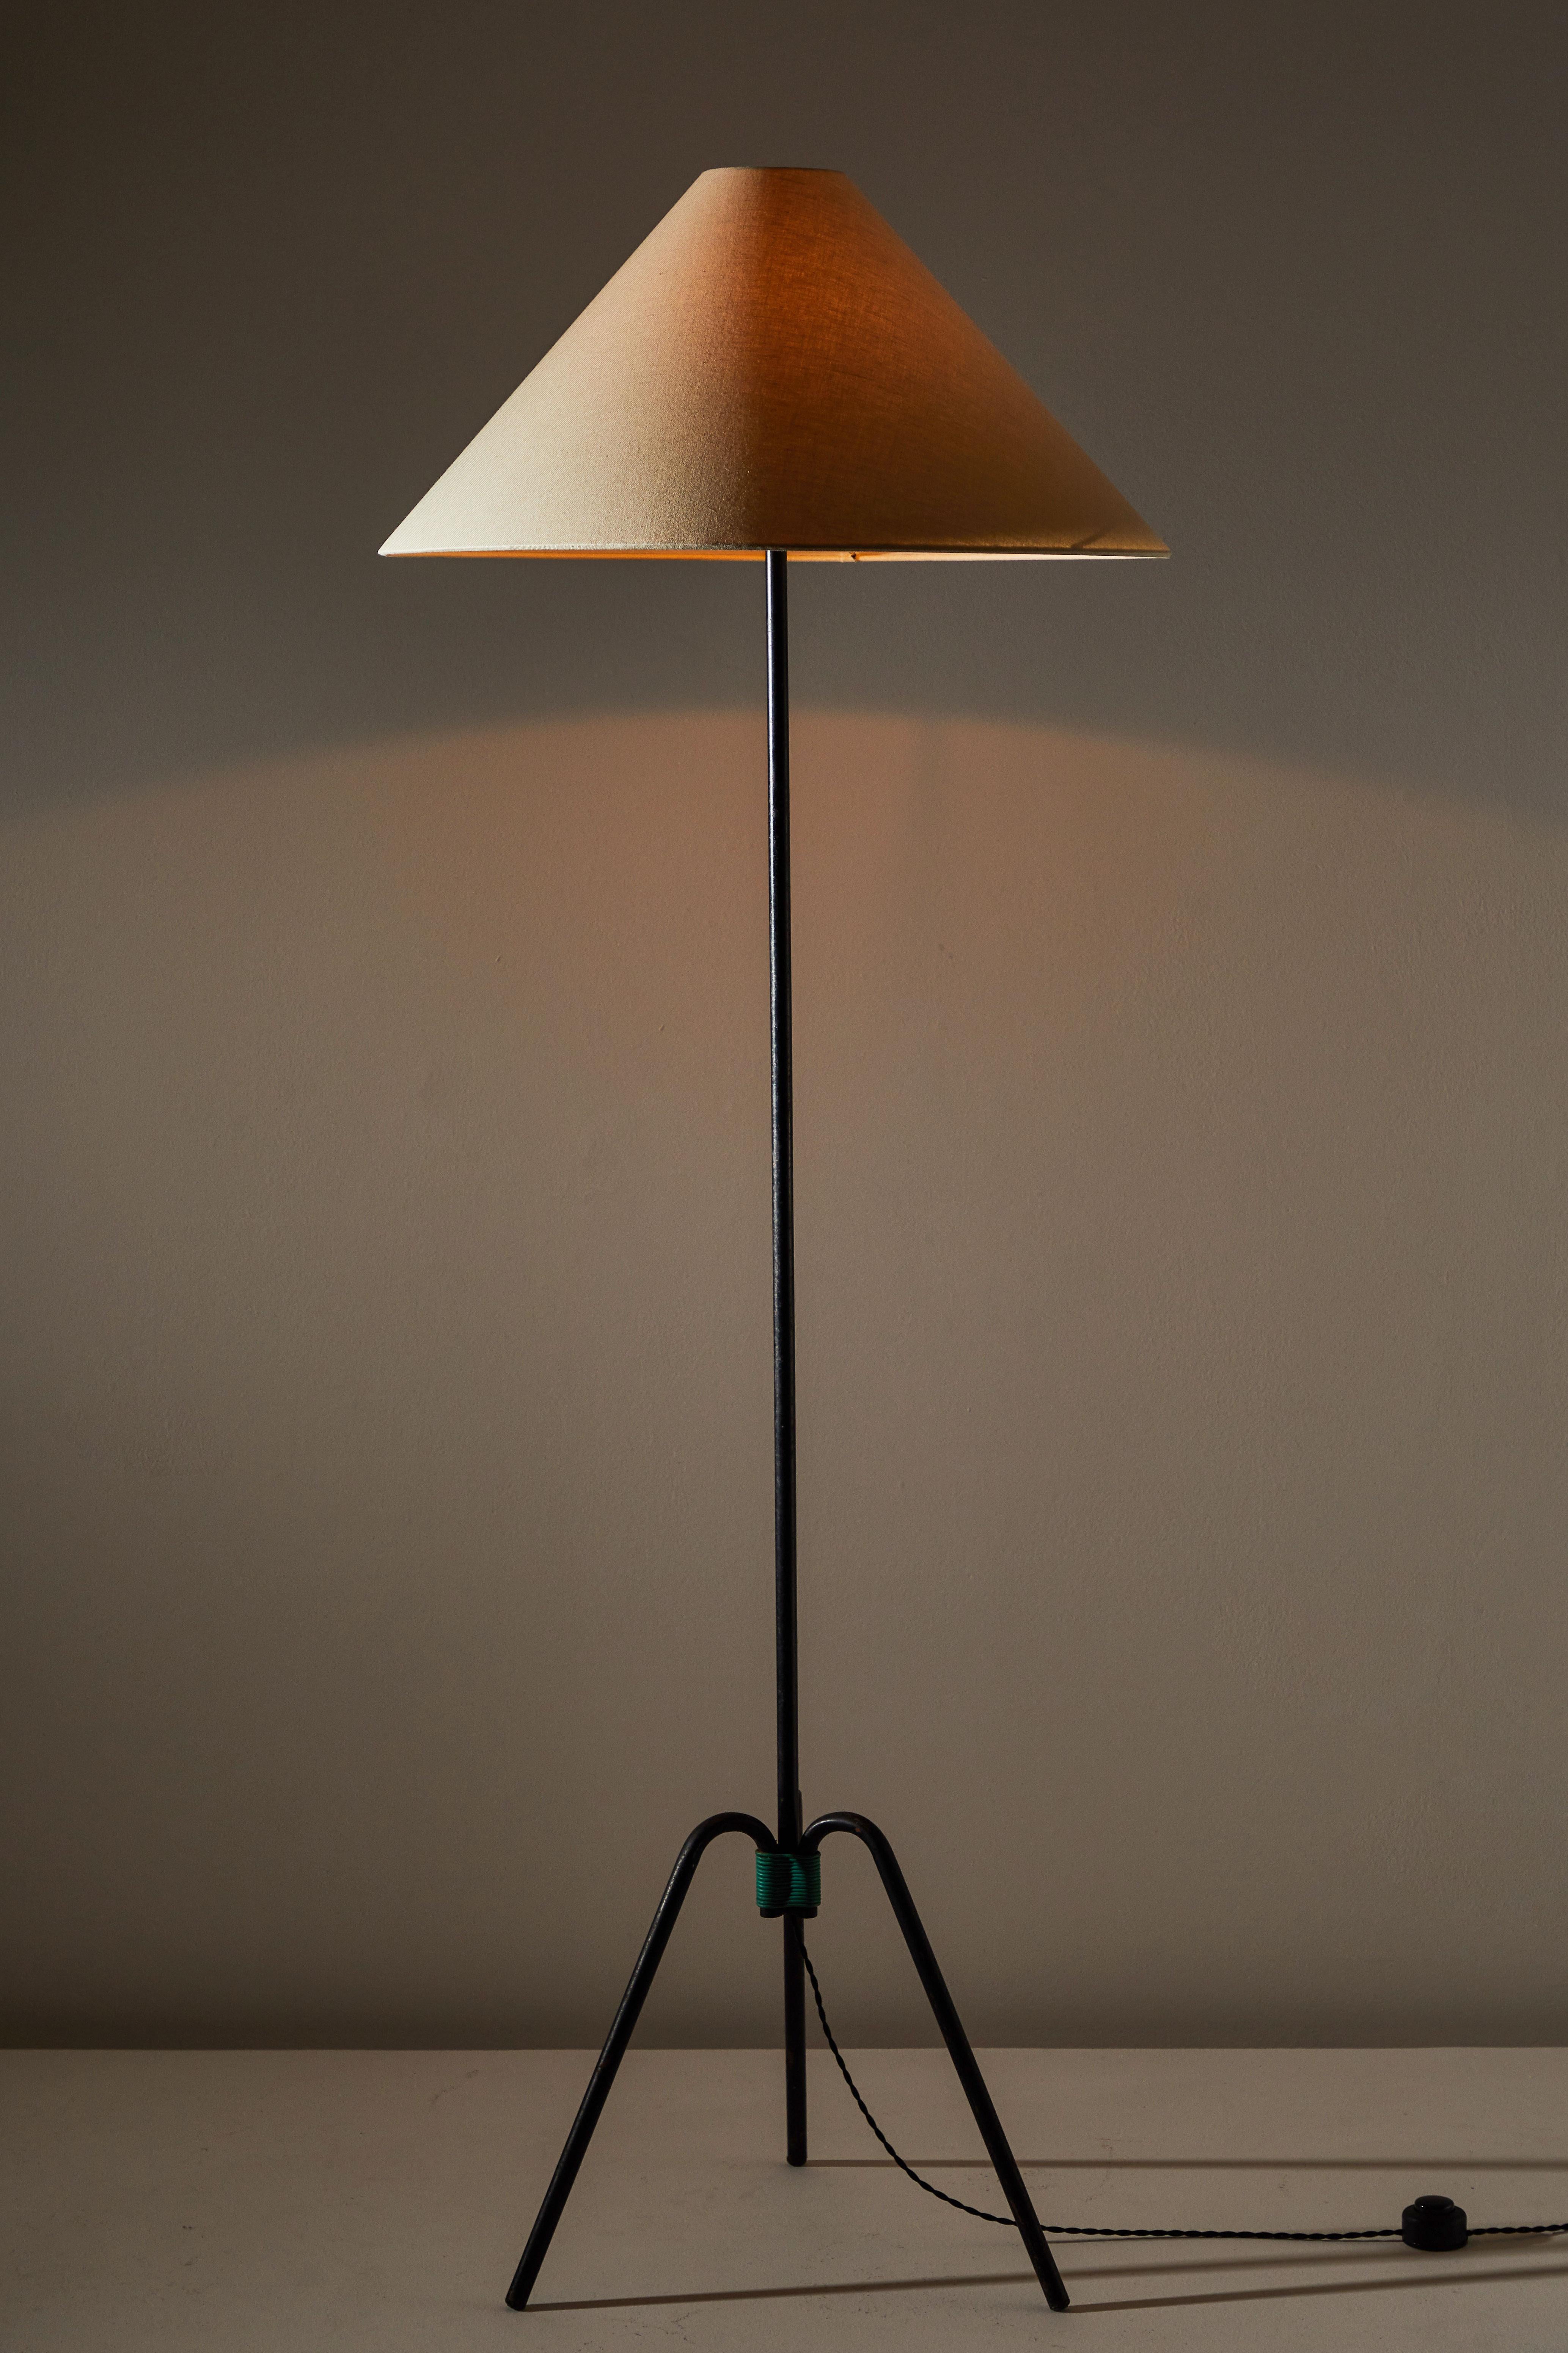 Floor lamp designed and manufactured in France, circa 1950s. Iron base, custom linen shade. Rewired with French twist cord. Takes one E27 75w maximum bulb.